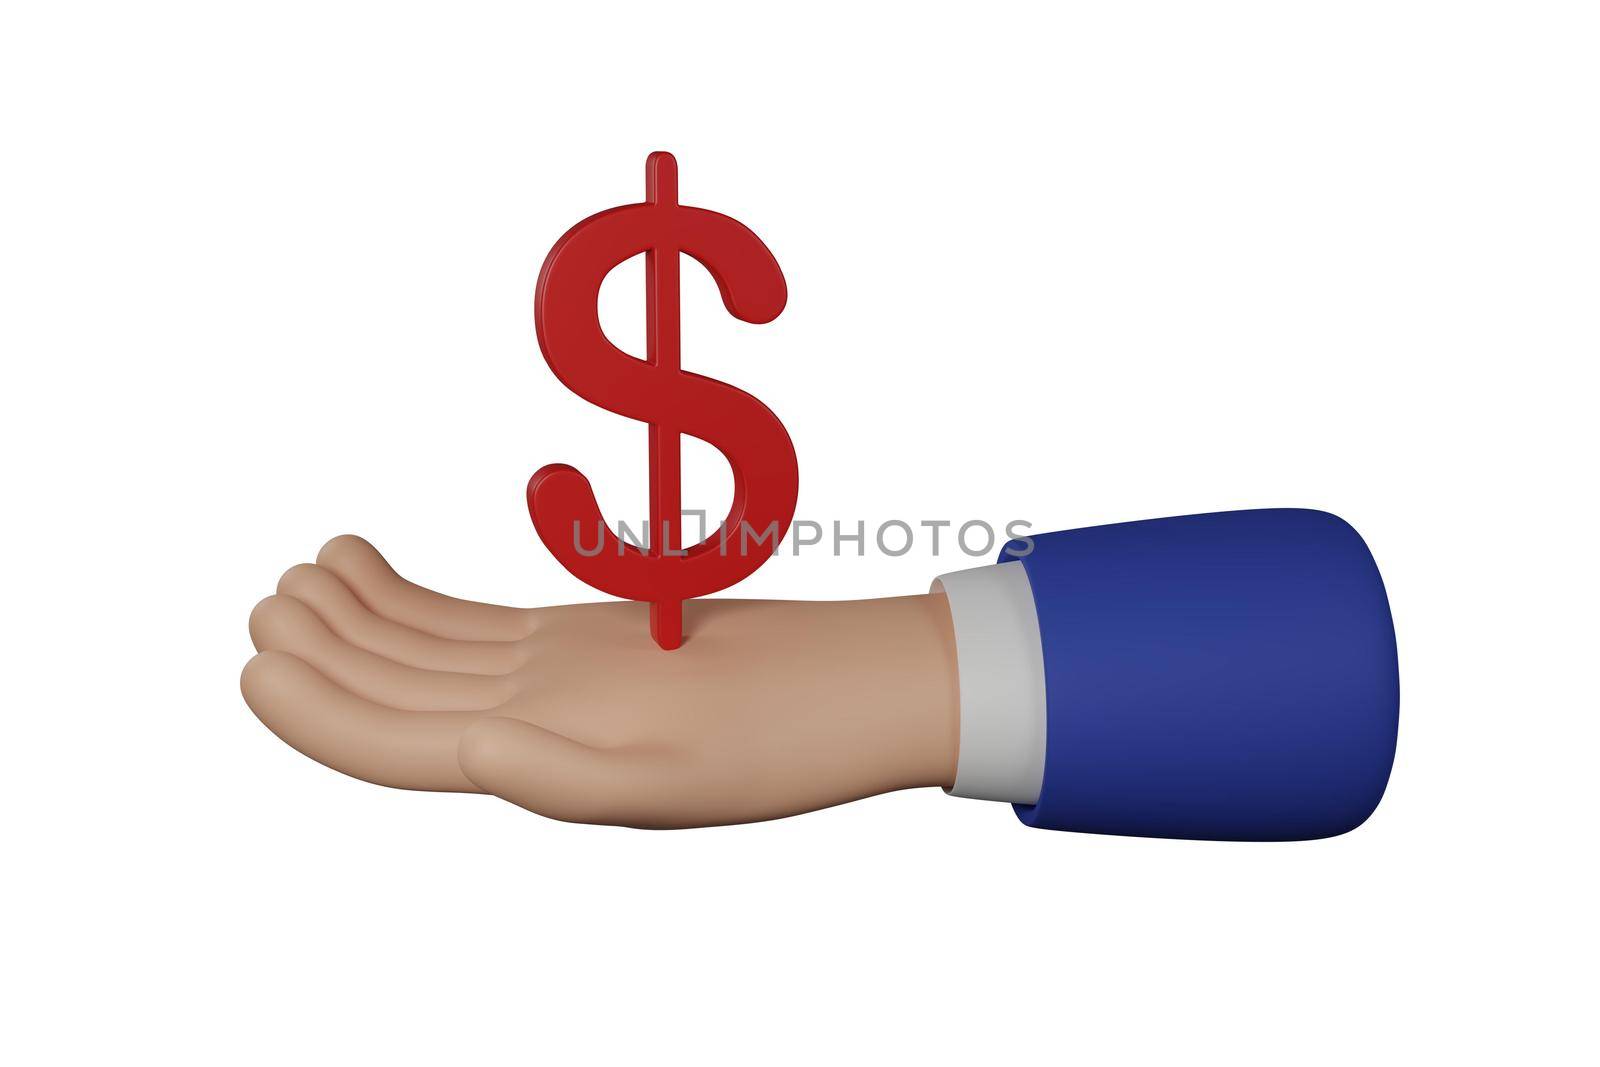 3D Cartoon businessman character hand holds a dollar sign isolated on white background. Hand gesture friendly funny style. 3d rendering.